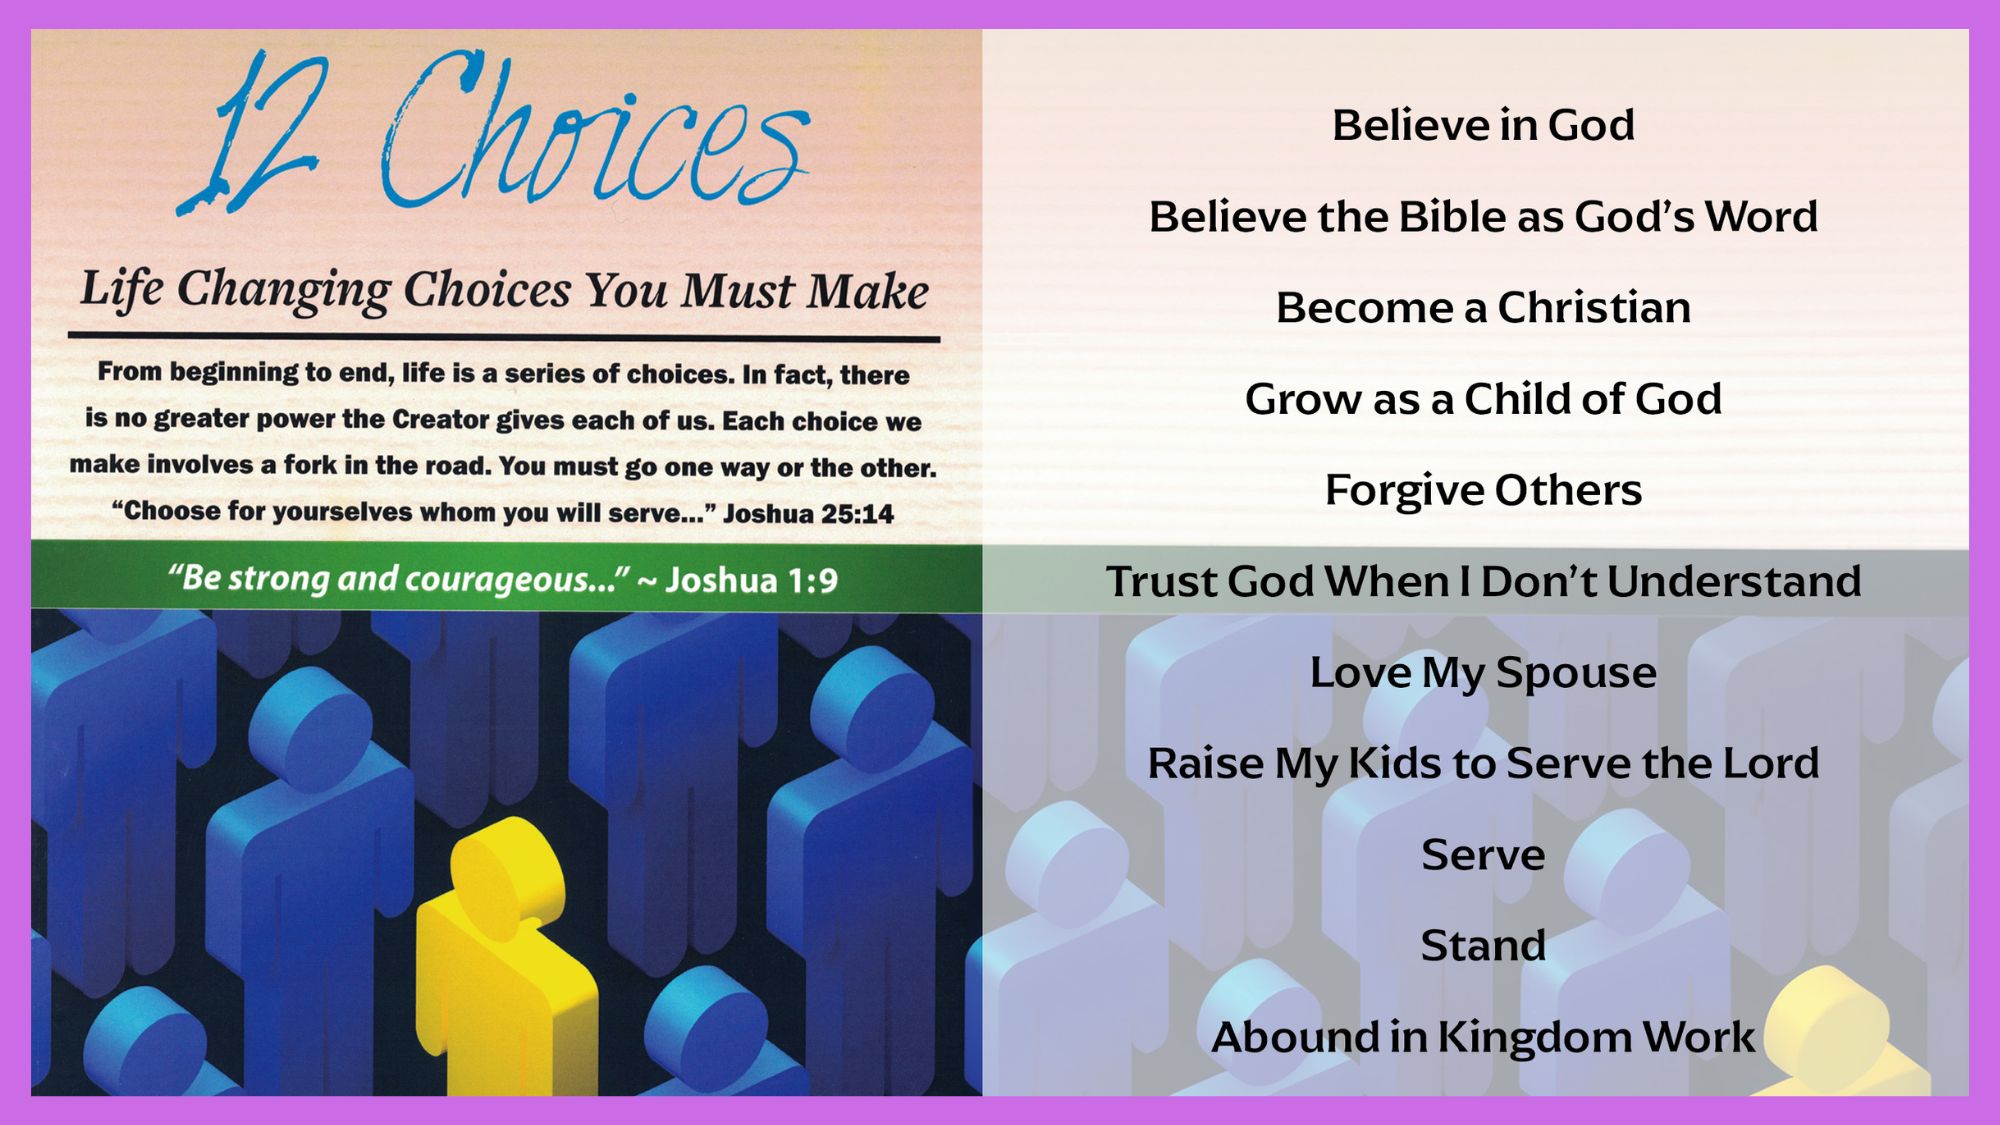 12 Choices - Life Changing Choices You Must Make: Choice # 6 Trust God When I Don't Understand